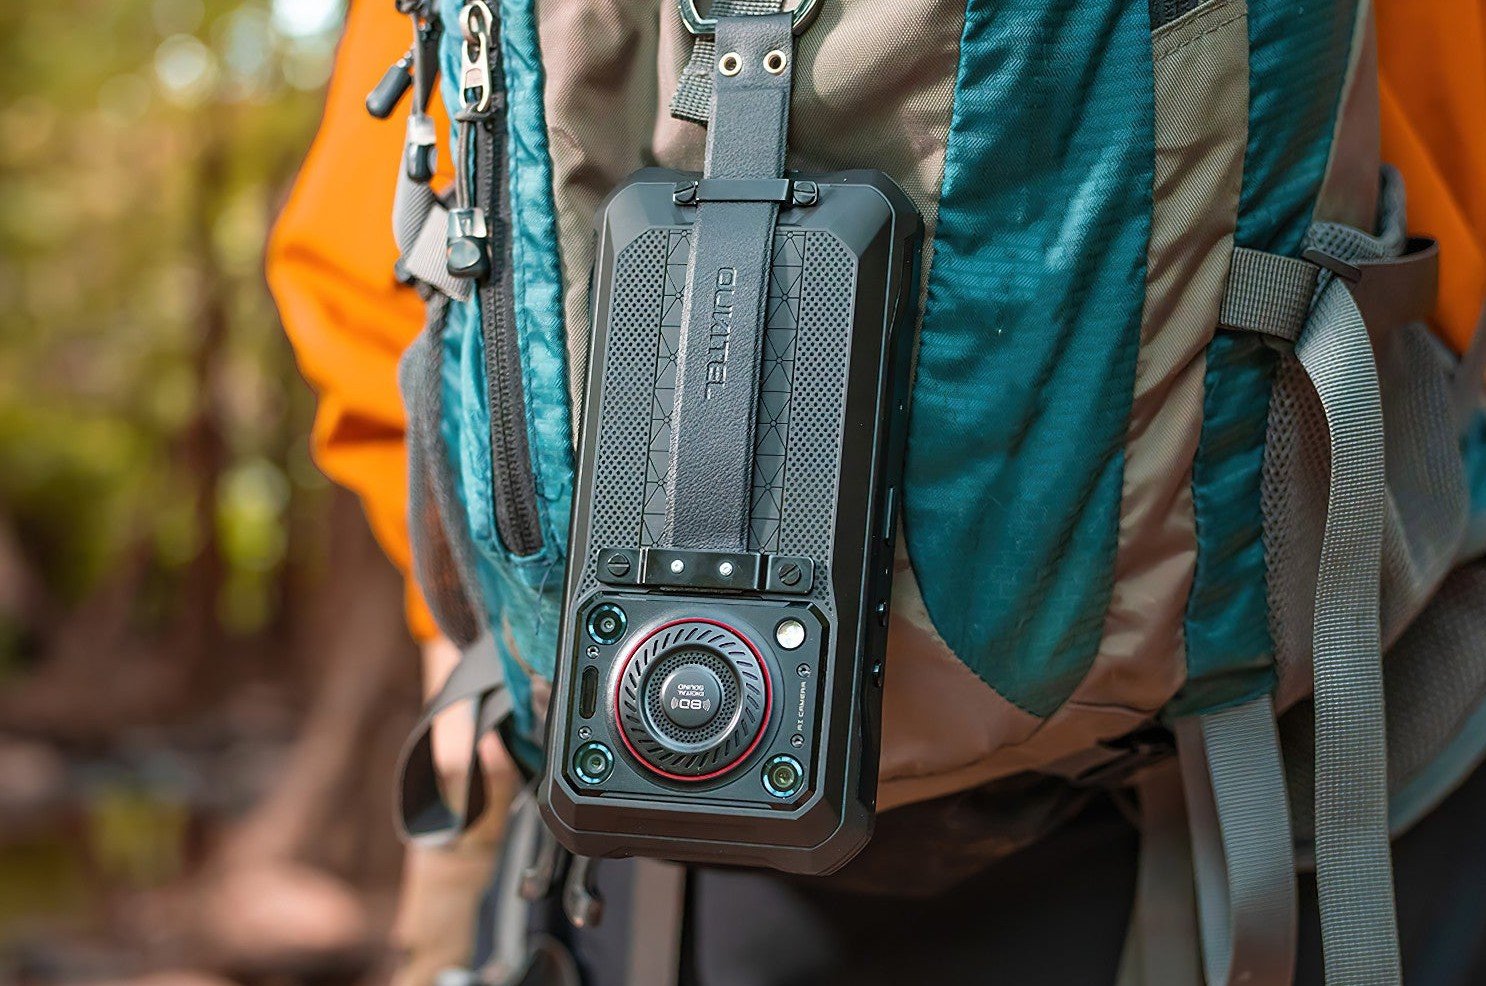 #Rugged smartphone with a 5W speaker on its back looks out of this world